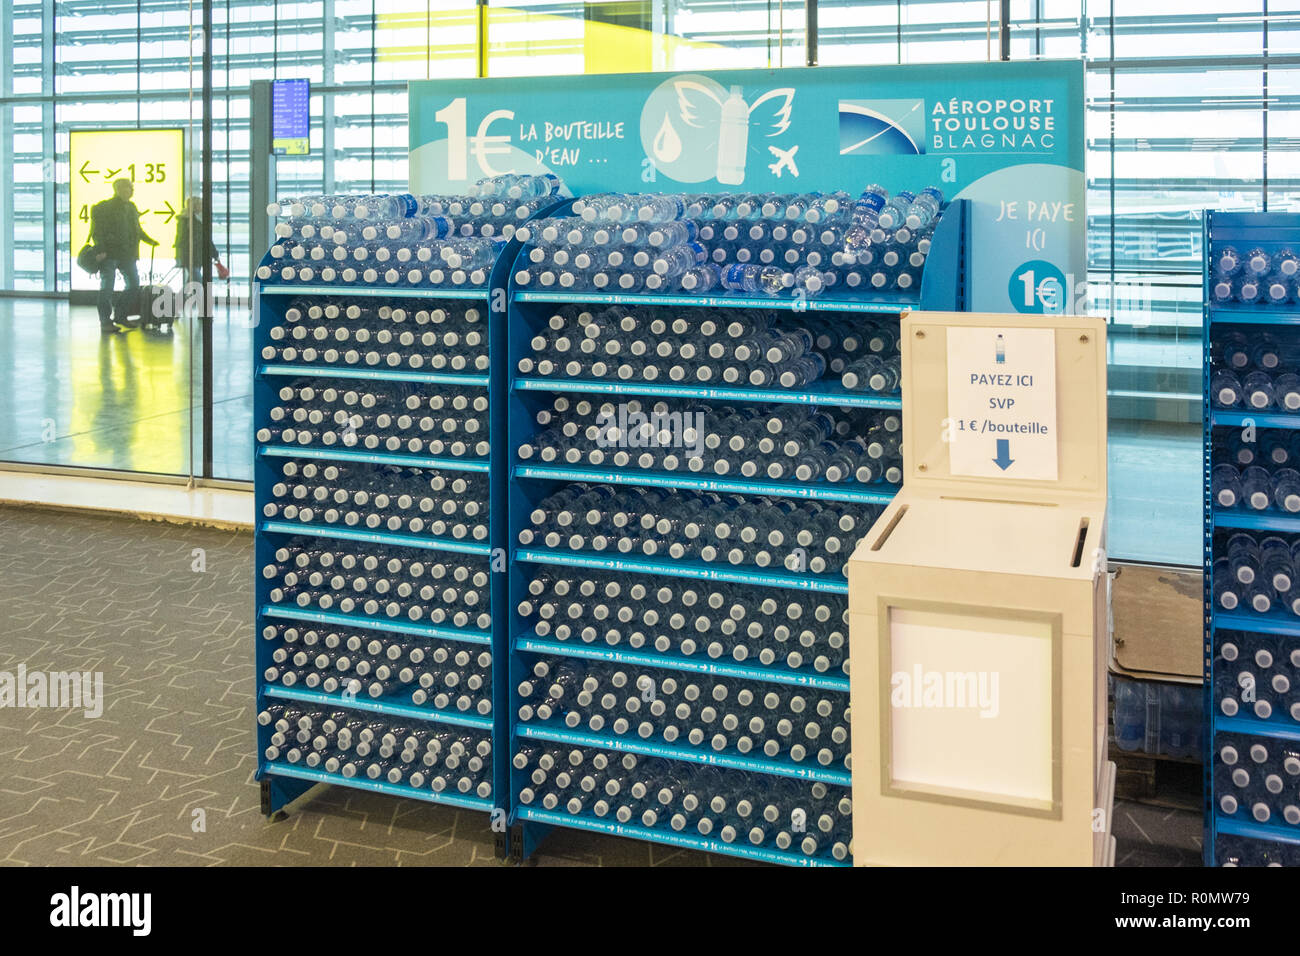 Bottled,water,Toulouse,Toulouse Airport,Toulouse Blagnac,Airport,international,transport,hub,Haute-Garonne,region,Occitanie,South,of,France,French, Stock Photo